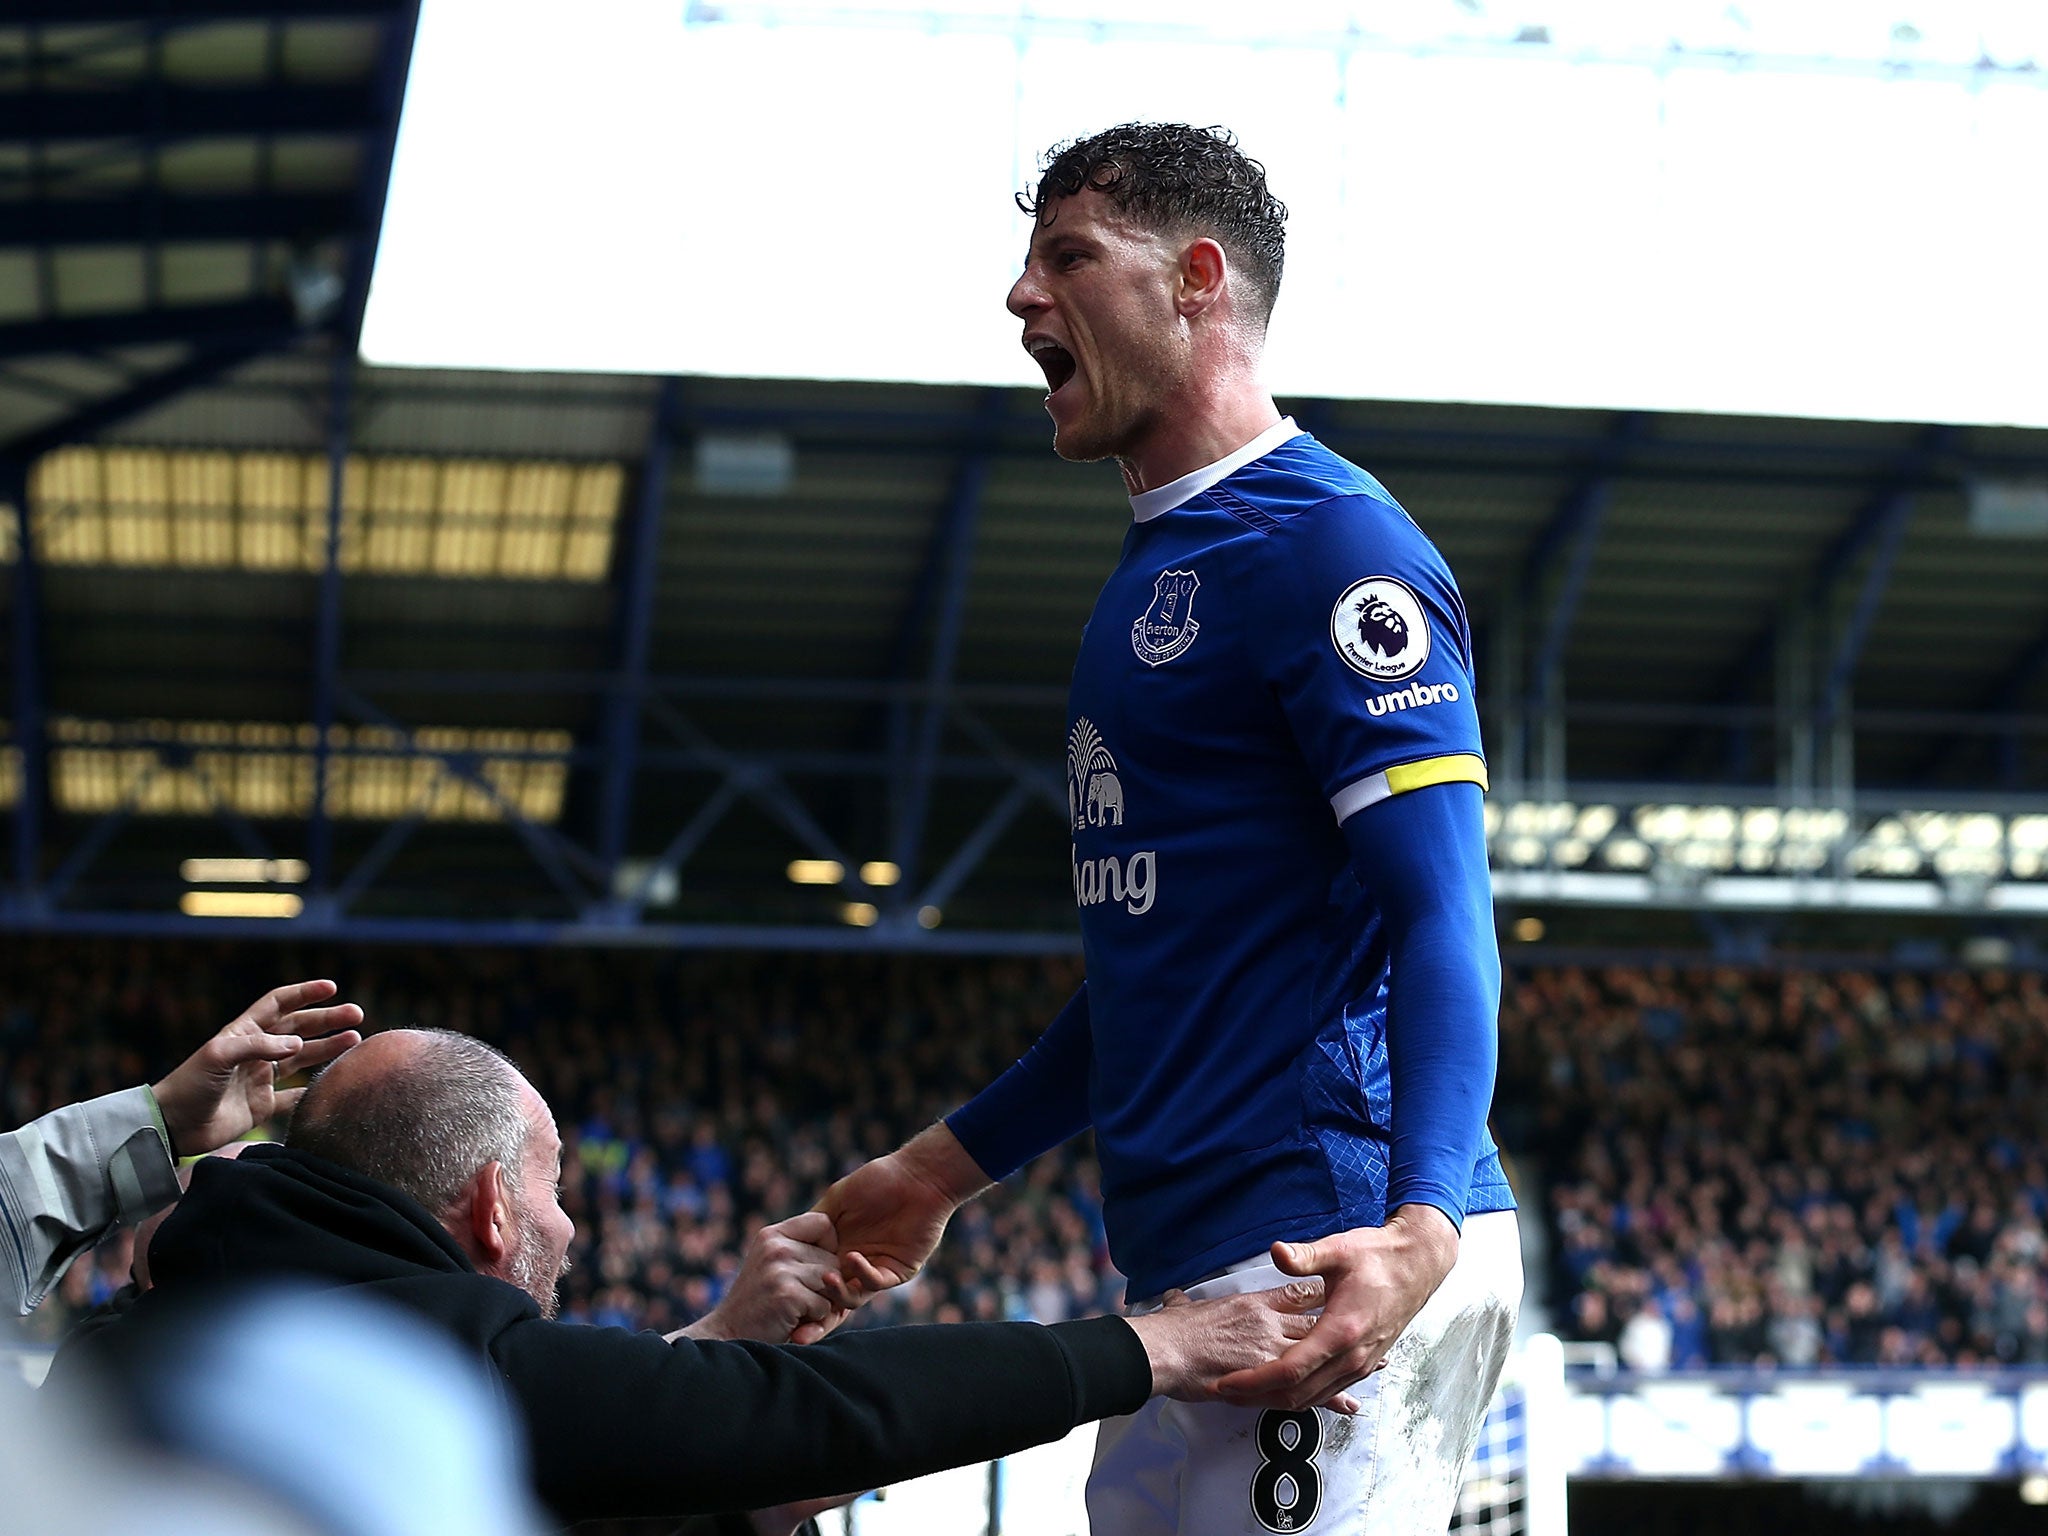 Ross Barkley celebrates after Ben Mee's own goal in Everton's recent clash with Burnley